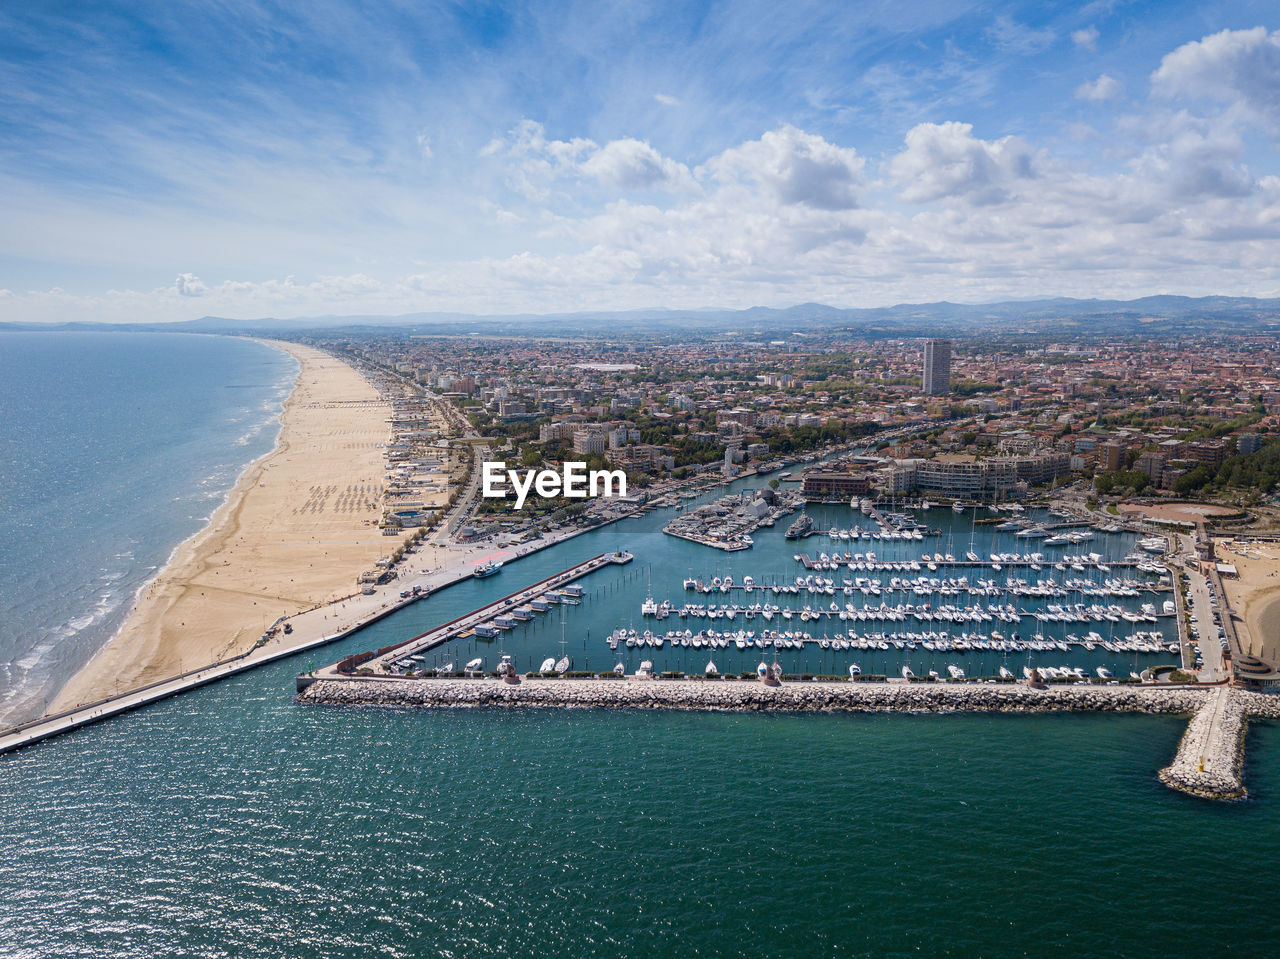 Panoramic view of rimini, its sea, its beaches and its port on the romagna riviera in post-pandemic 